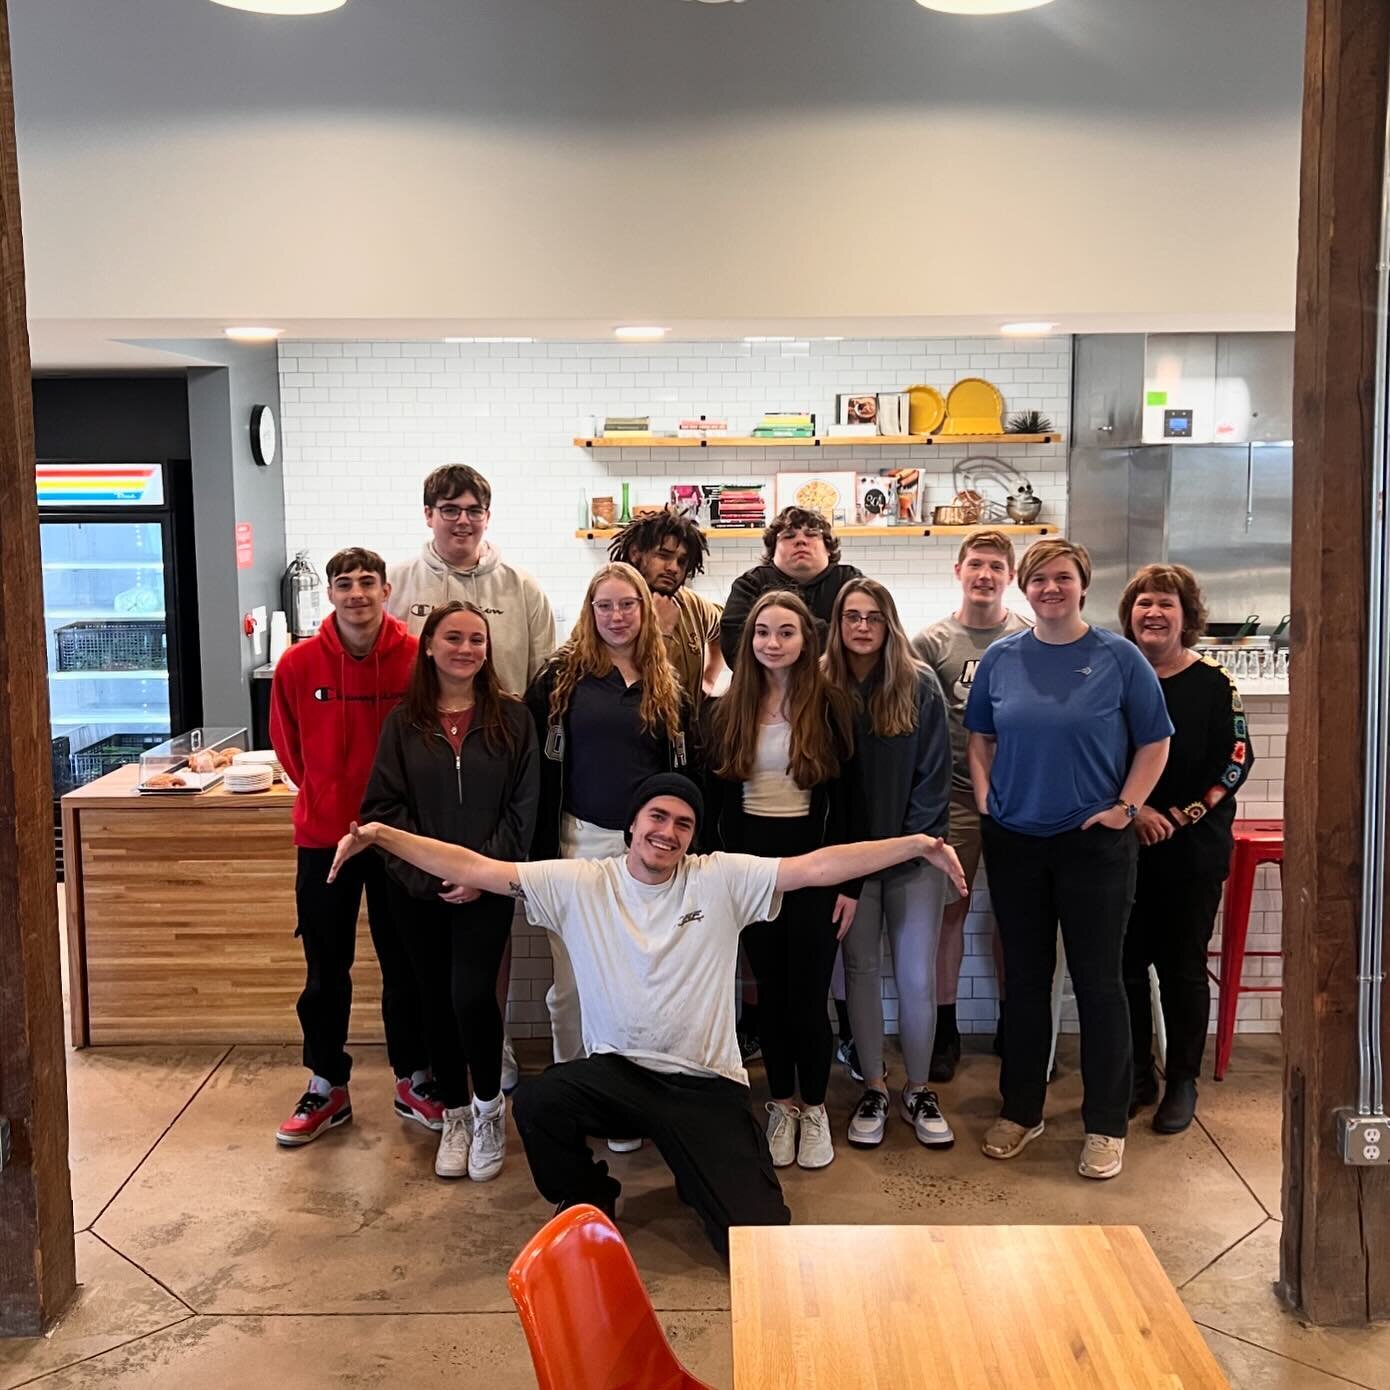 Last week we had the opportunity to host the Pulaski County High School Culinary Arts students at Hatch, where they got the chance to have lunch &amp; chat with Henry of @1115mobilekitchen, tour our facilities, and meet a few other small business own